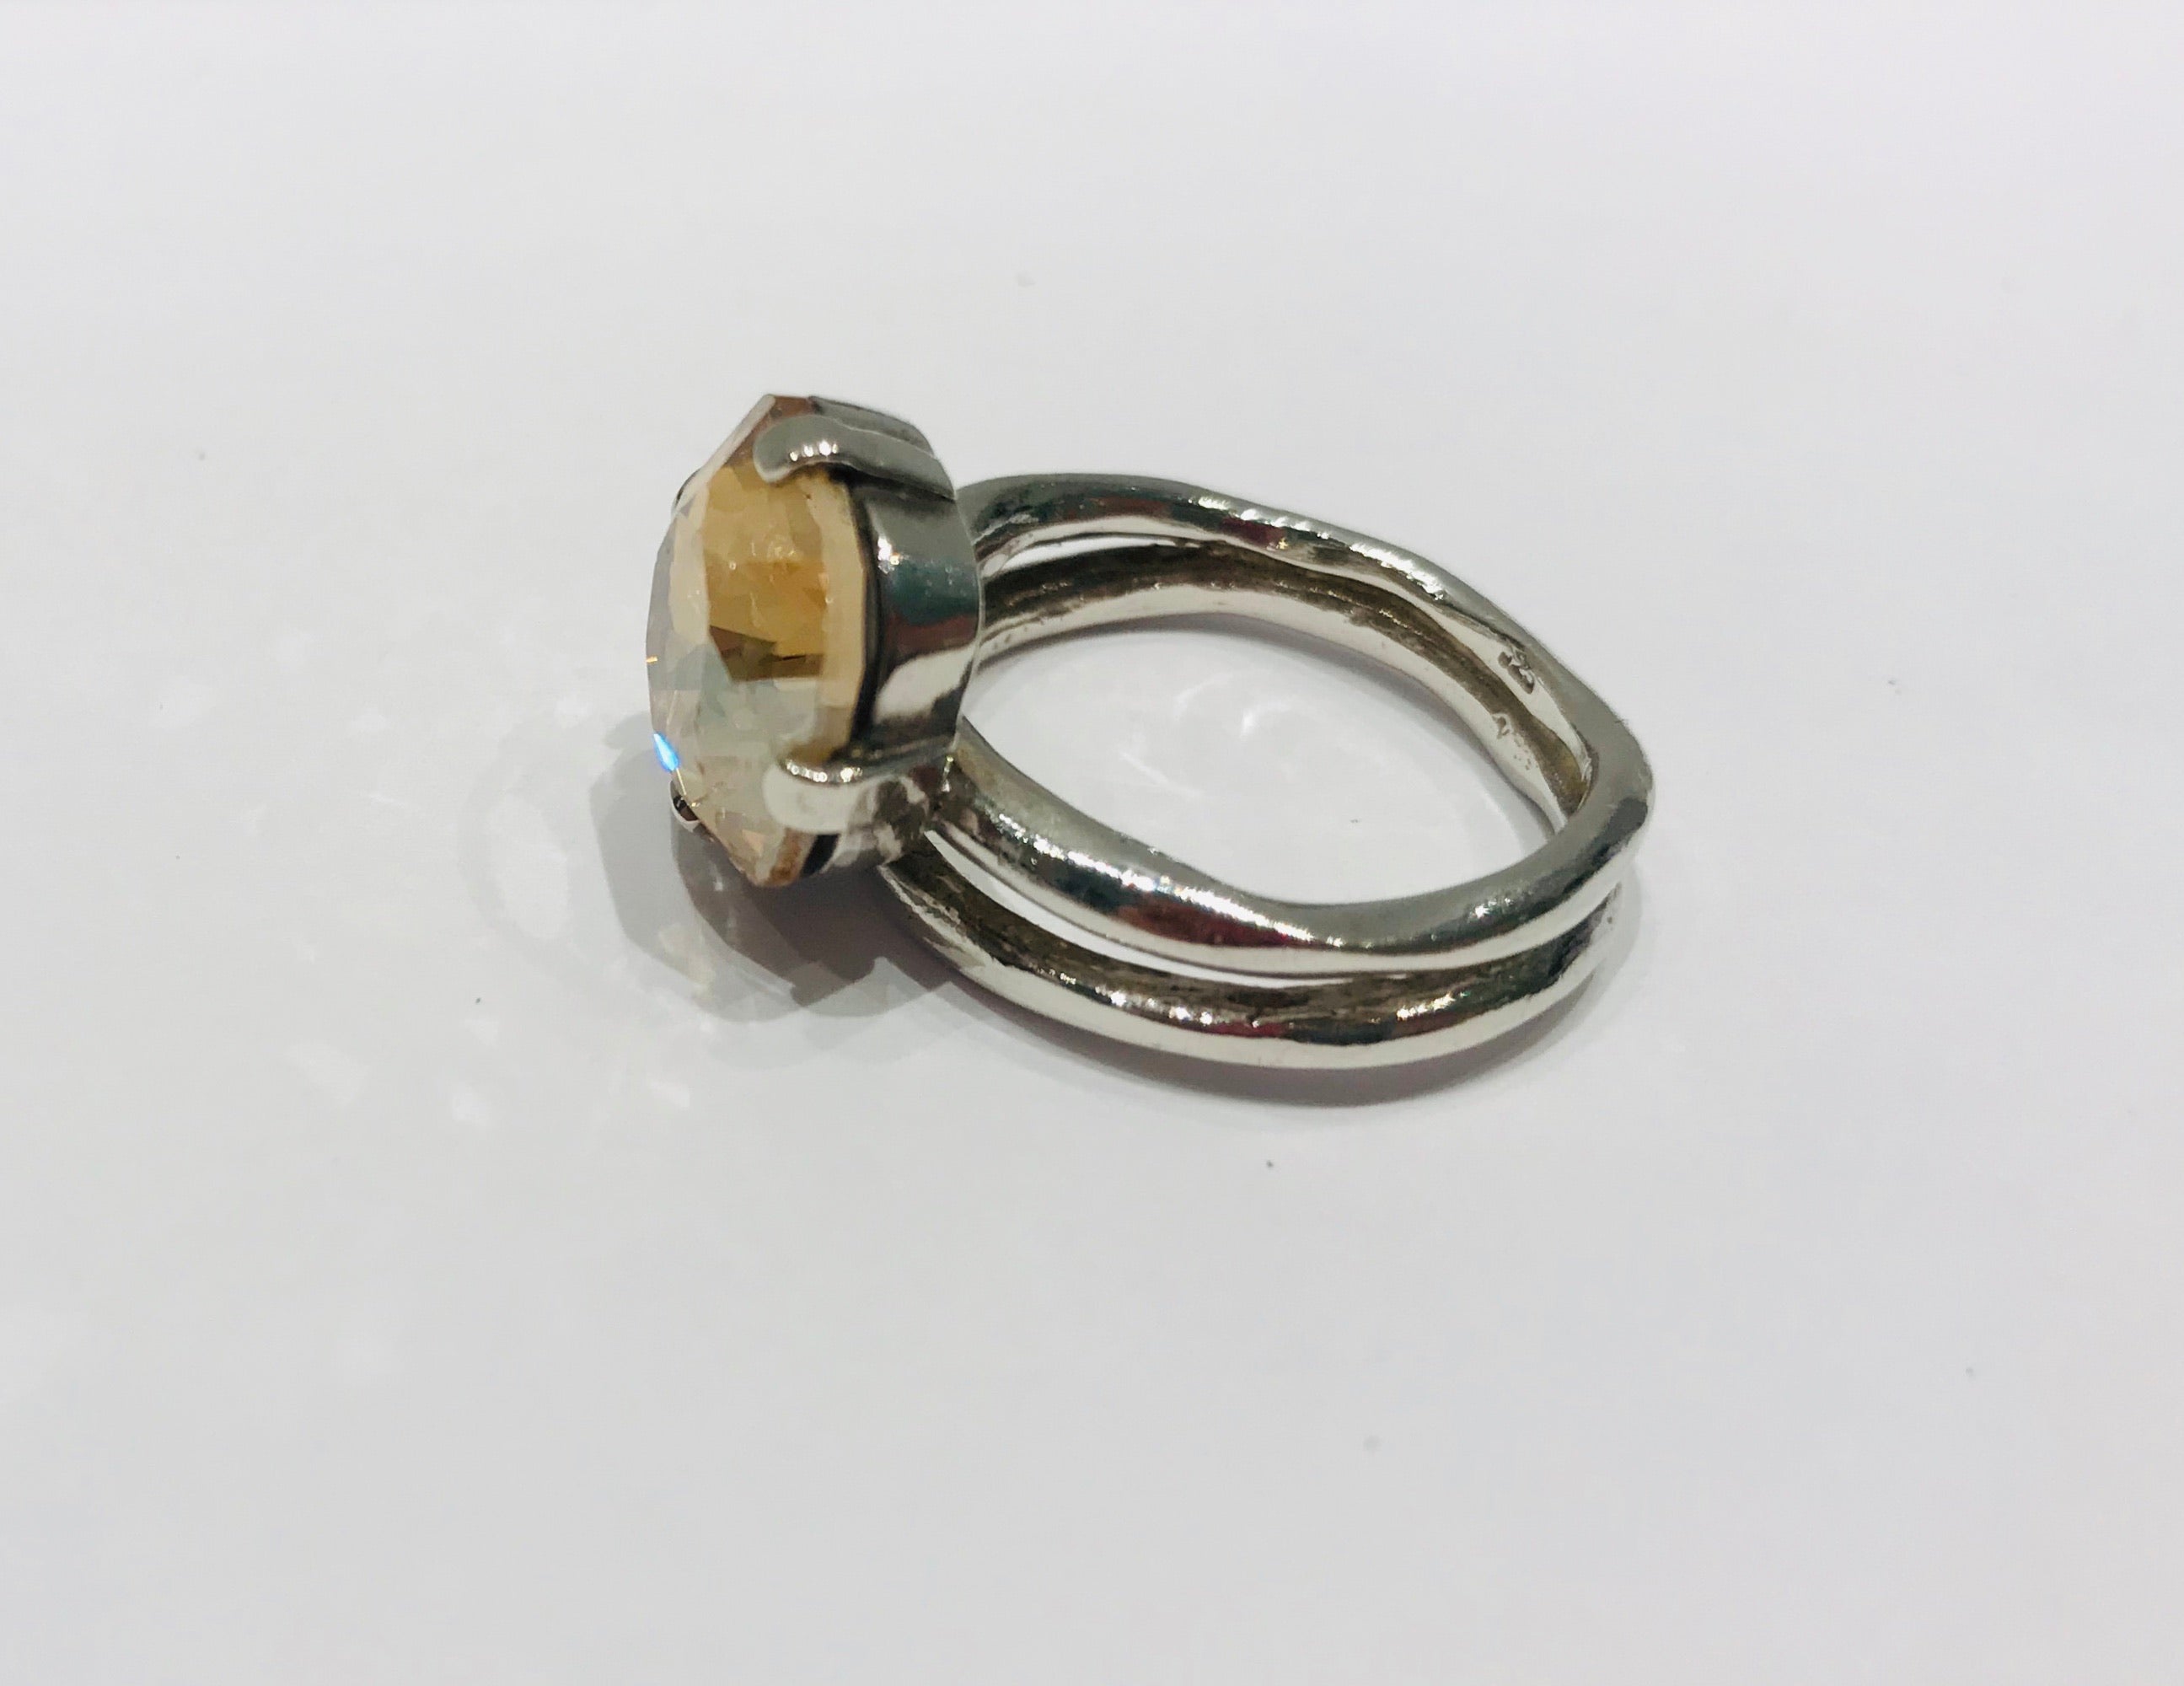 Wouters & Hendrix silver ring with cristal stone